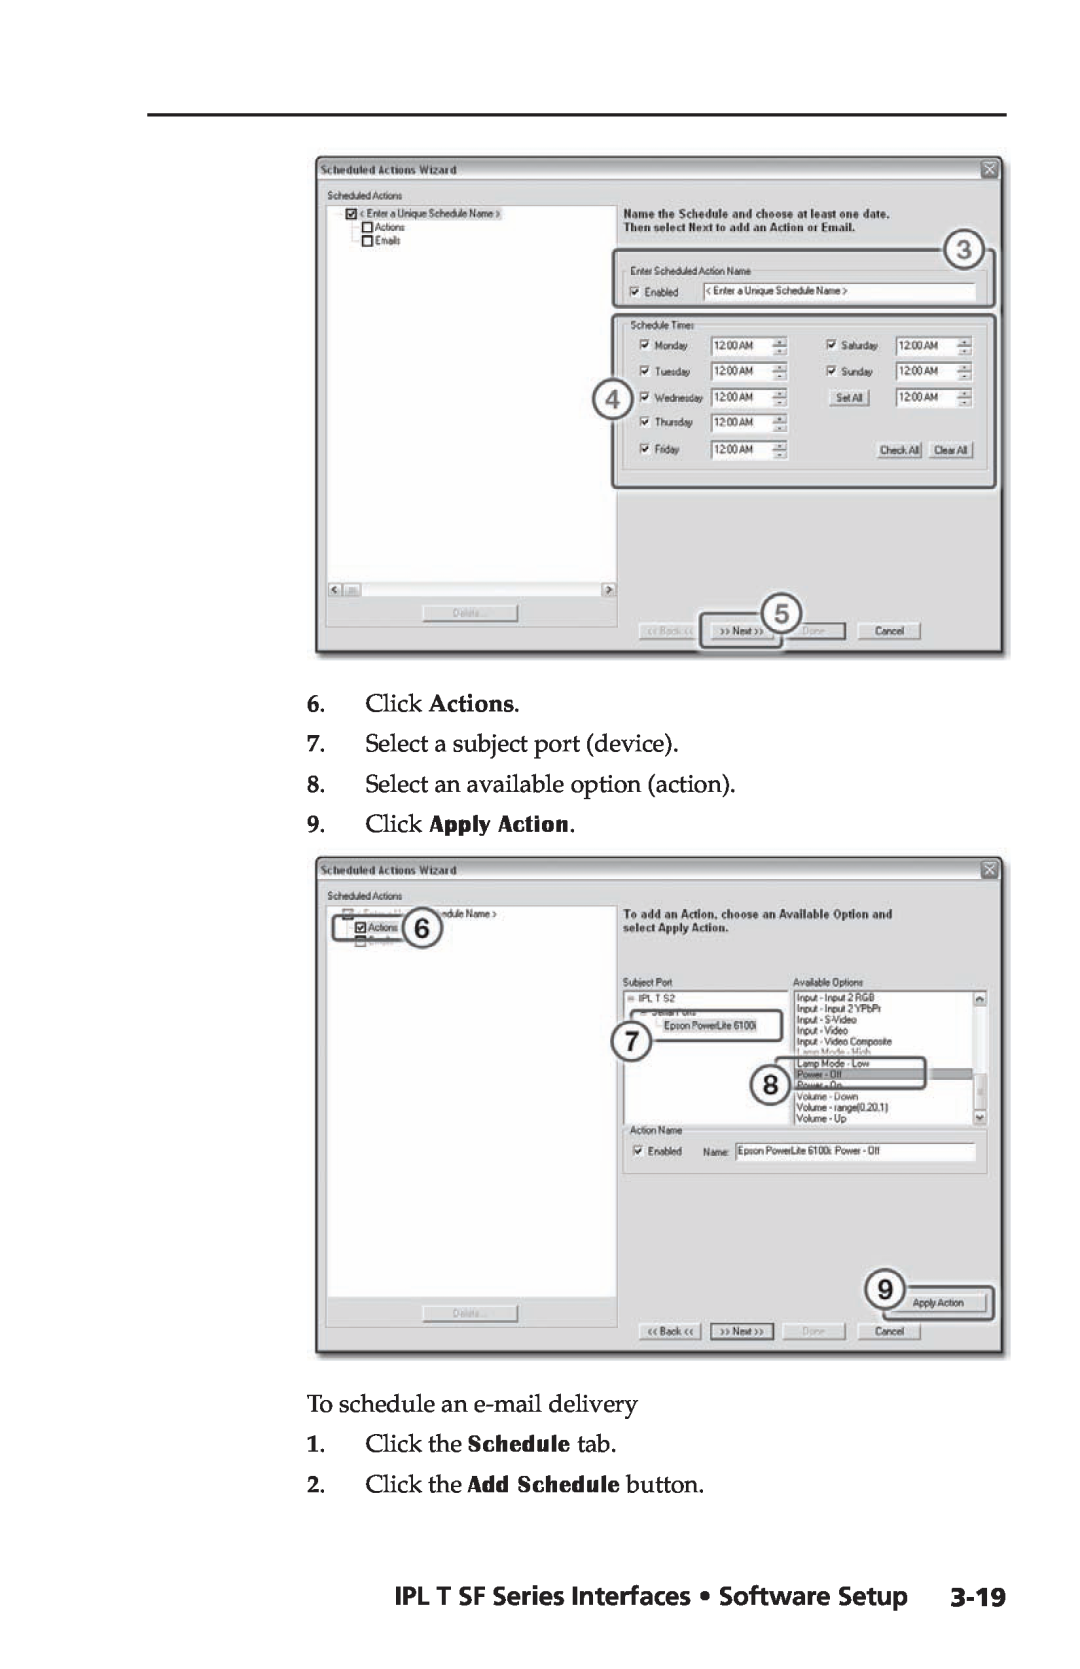 Extron electronic setup guide Click Apply Action, IPL T SF Series Interfaces Software Setup 